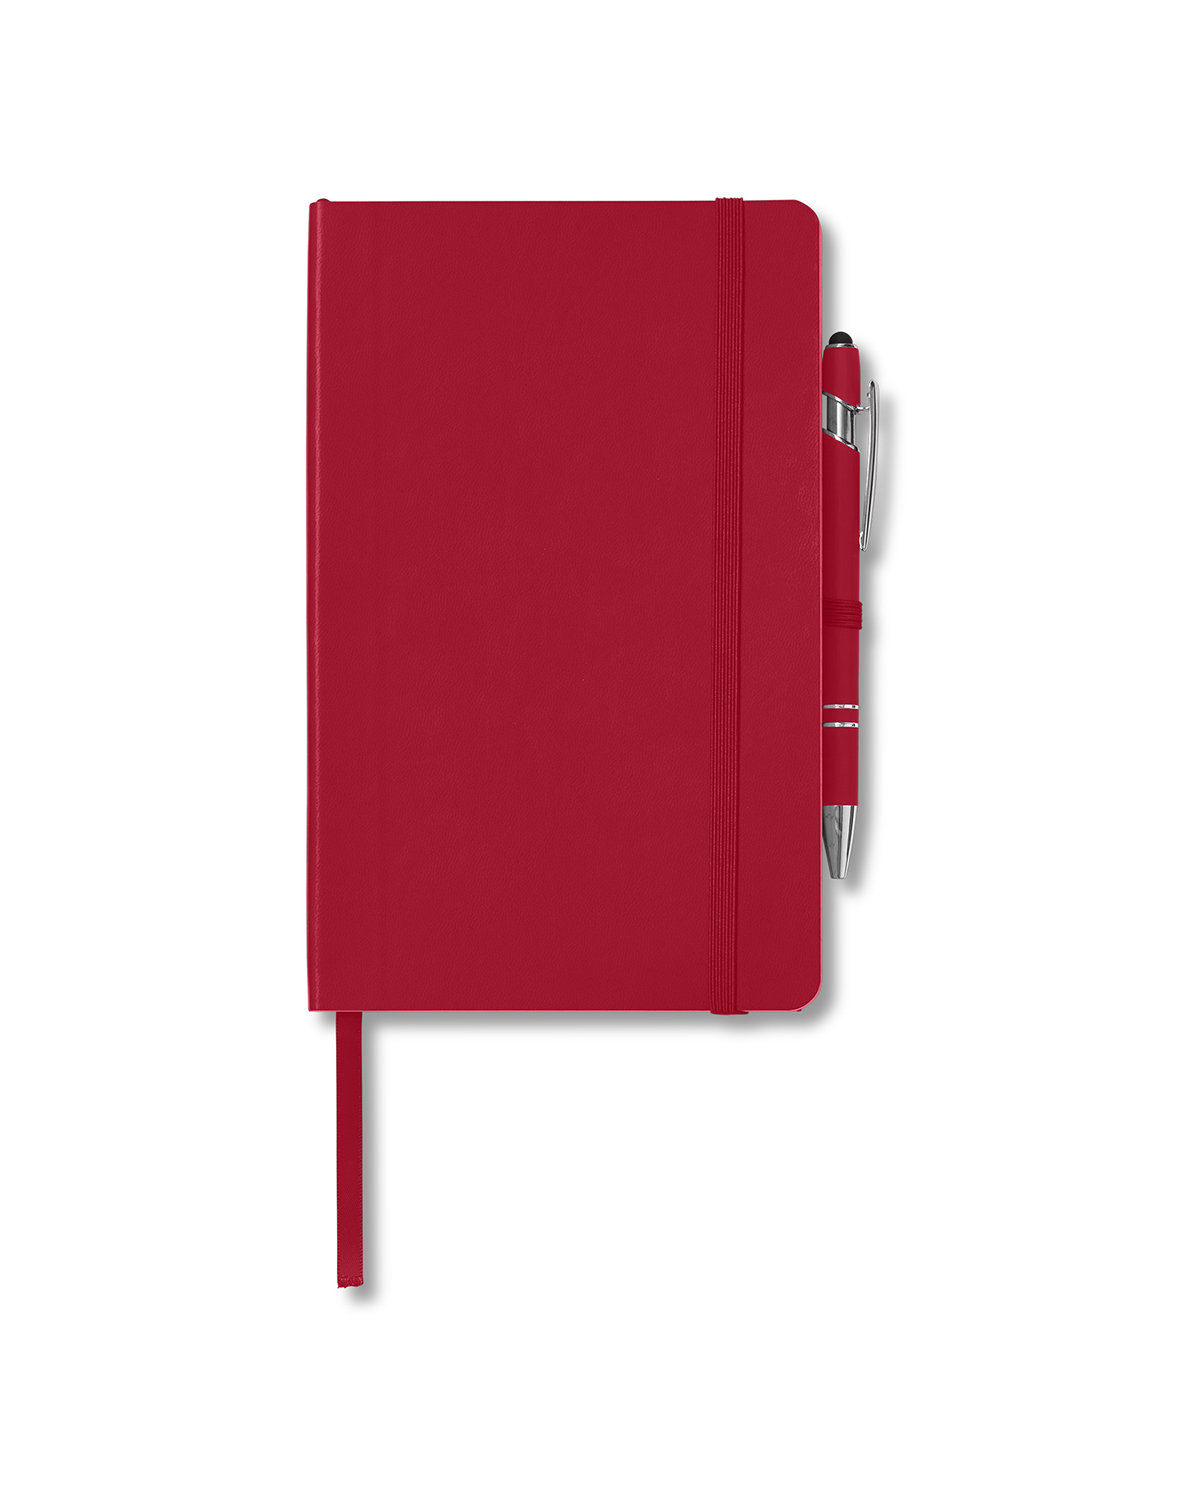 CORE365 Soft Cover Journal And Pen Set classic red 